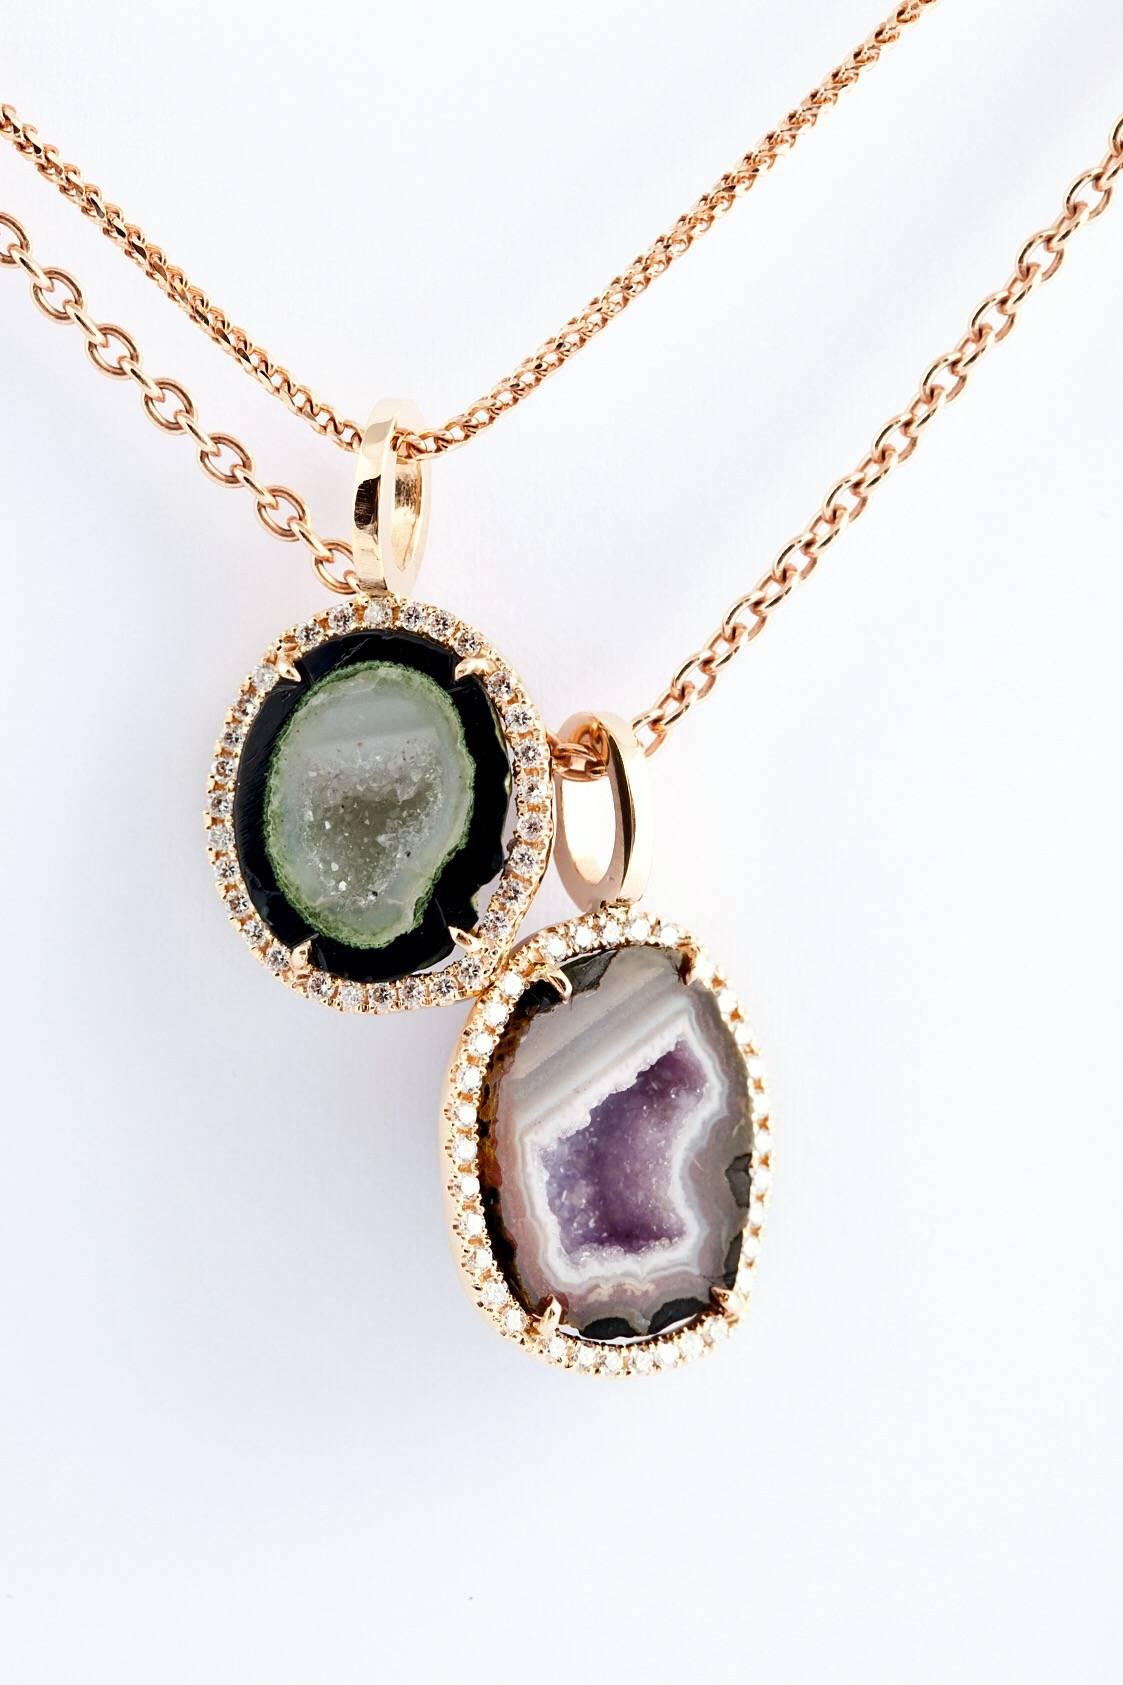 This 18 k rose gold bordeaux agate geode pendant has 0.21 ct of dazzling diamonds.
This is the perfect gift for yourself or a special person.
The chain is included and is 45 cm and adjustable with a sliding ball system.